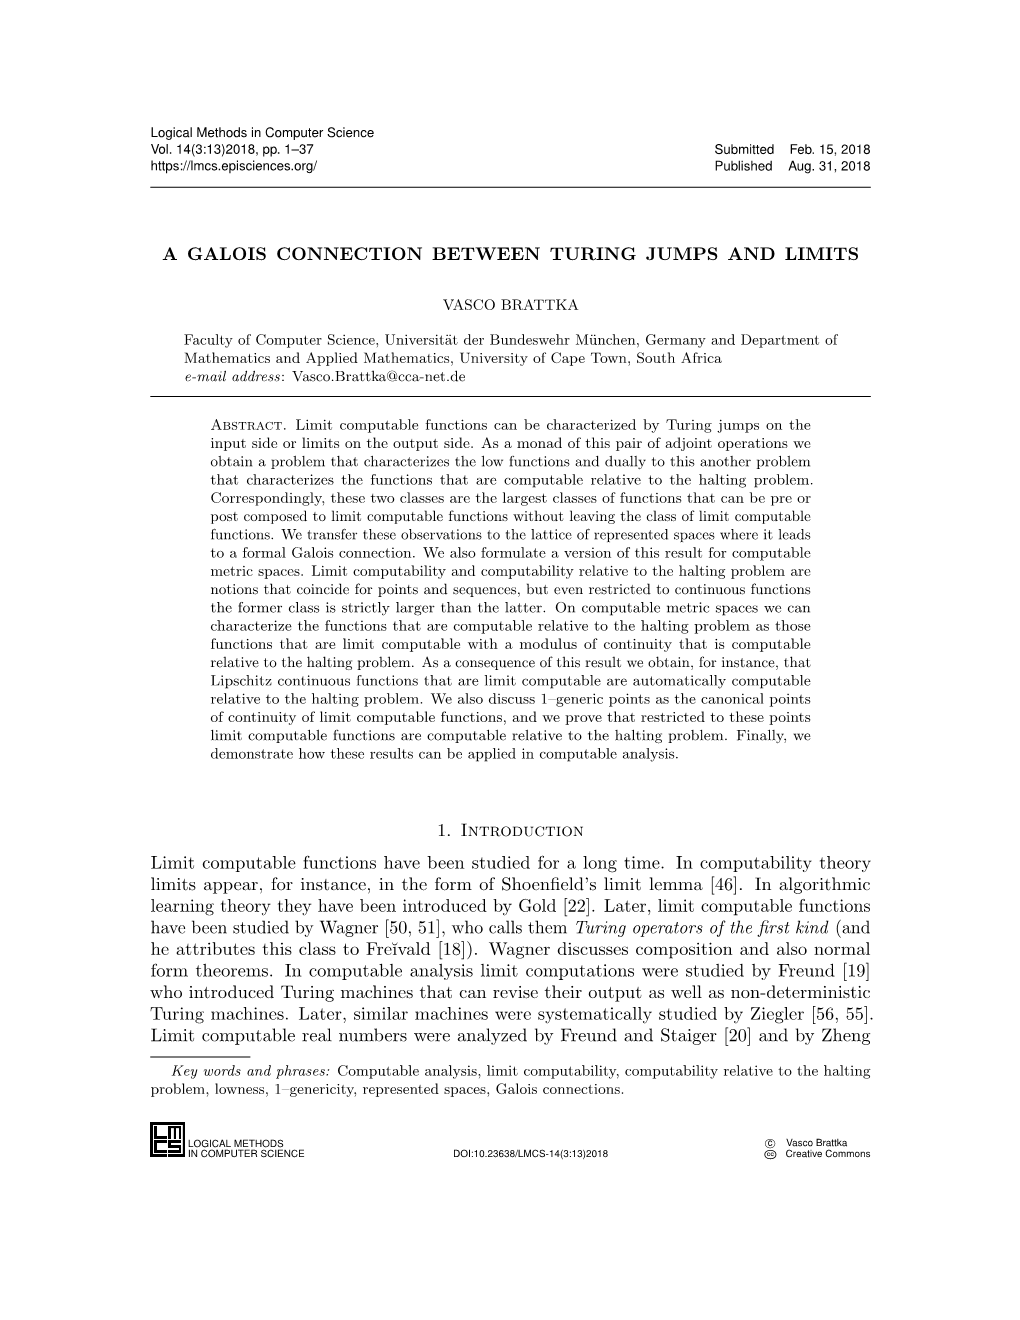 A Galois Connection Between Turing Jumps and Limits